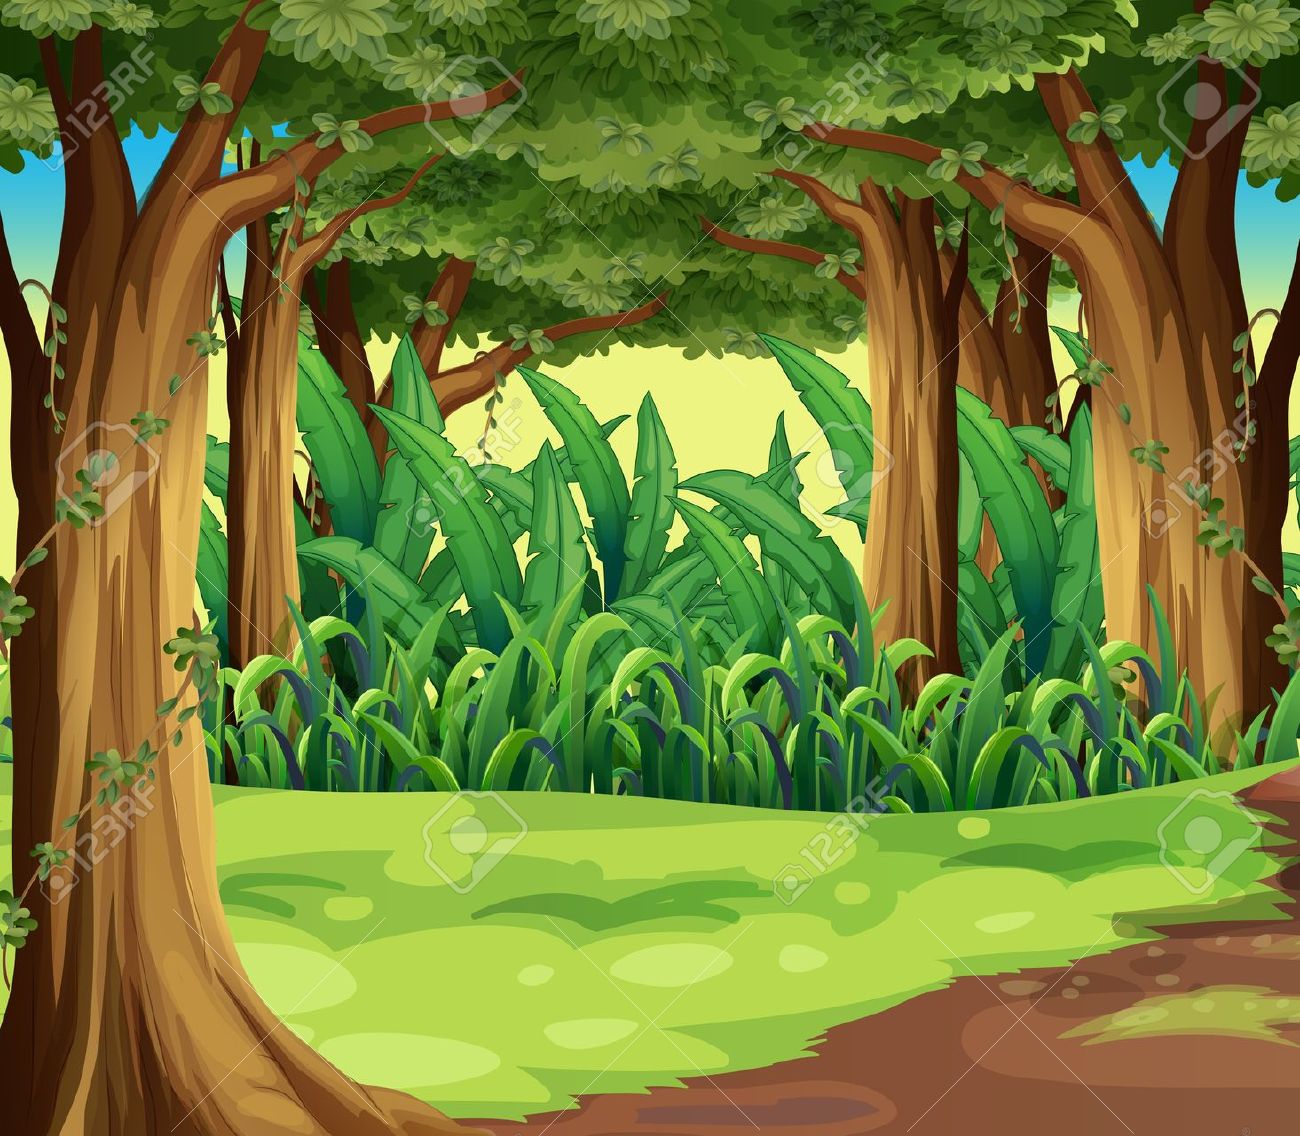 forest clipart hd - Clipground